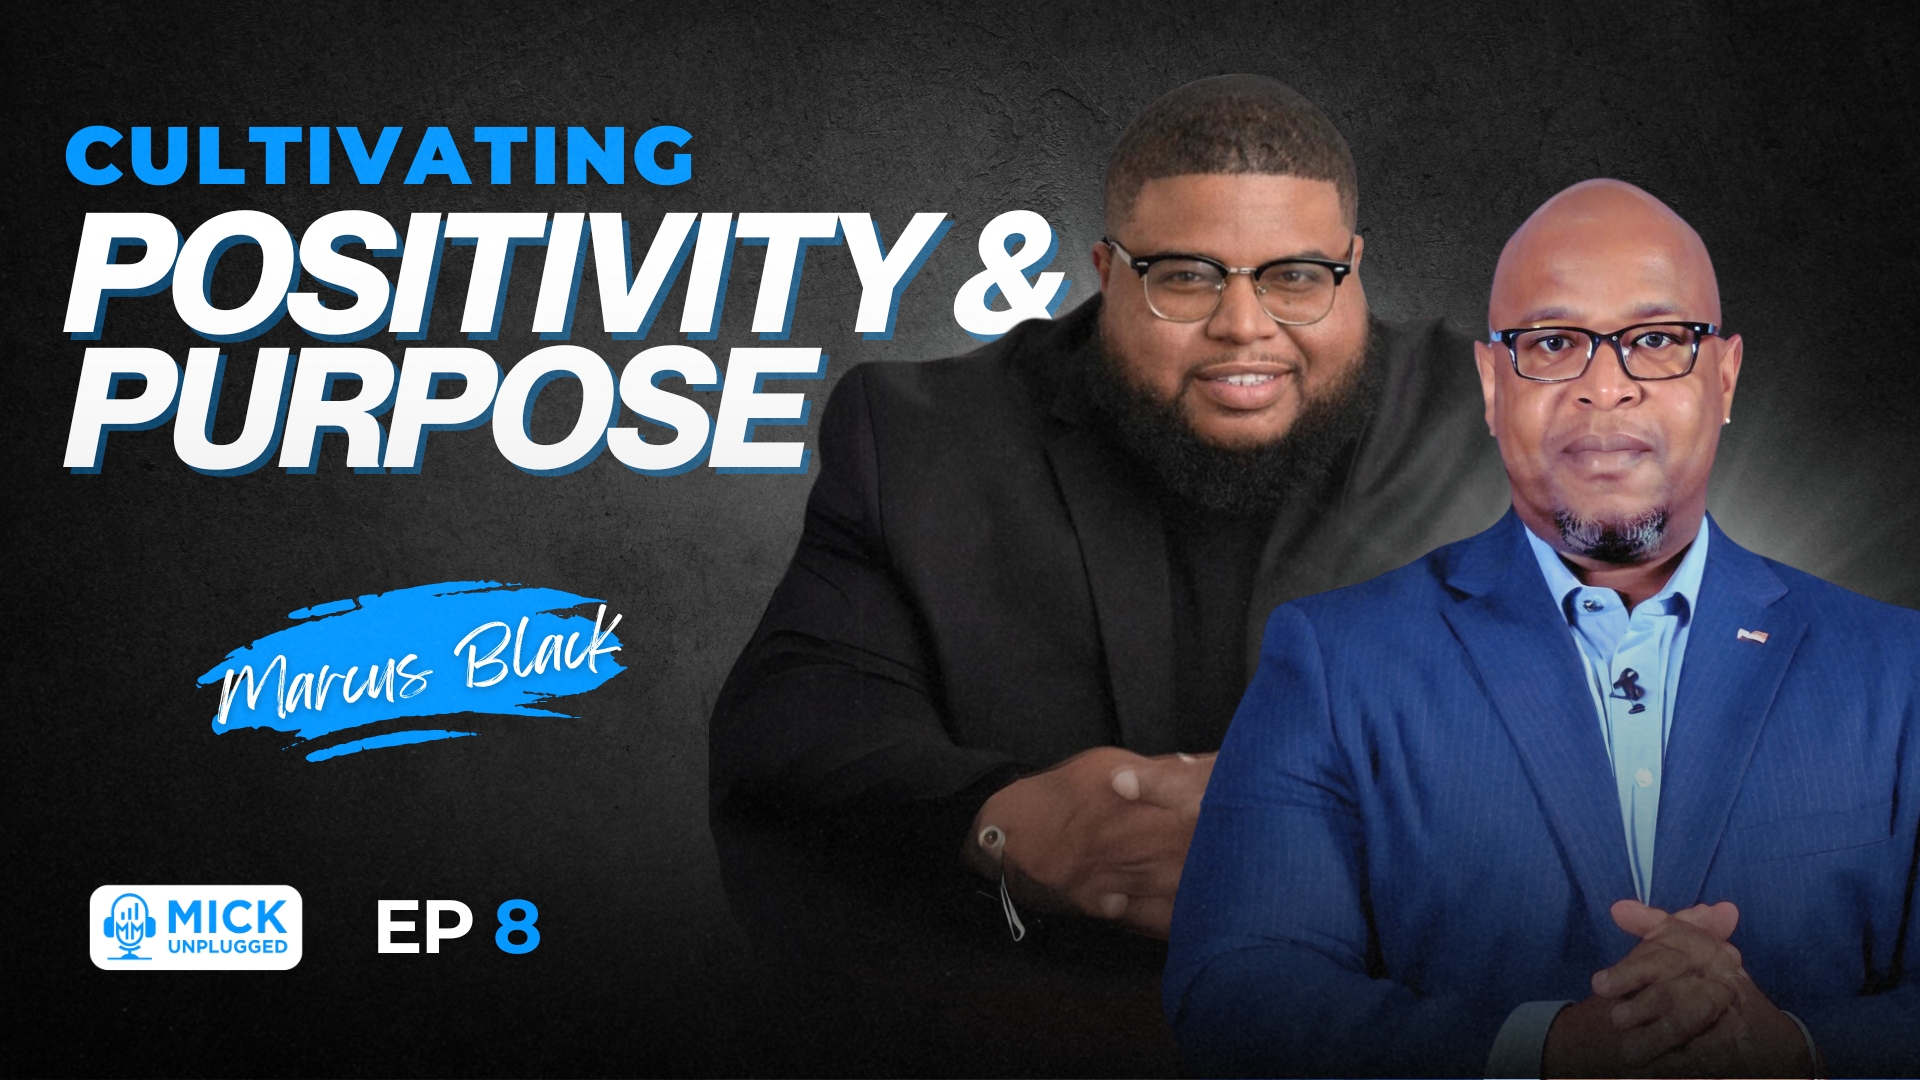 EP8: Cultivating Positivity and Purpose With Marcus Black